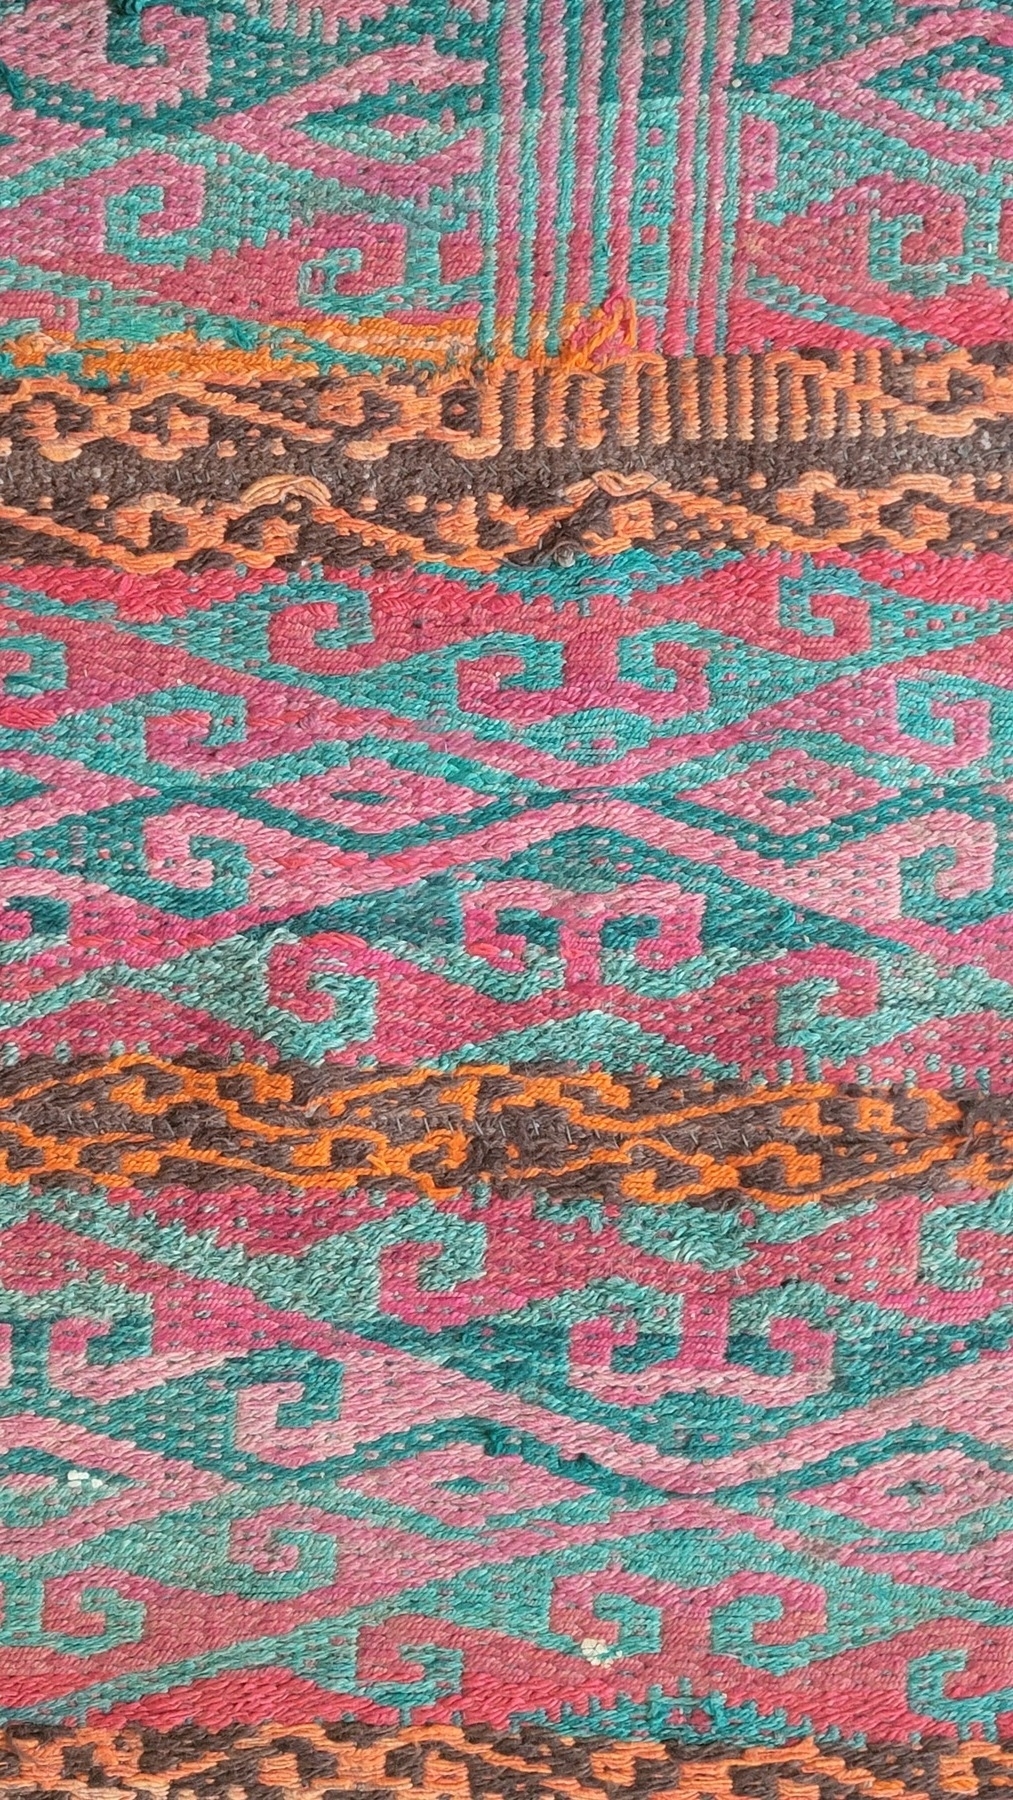 zoom-in of a patterned rug with orange, brown, red and green